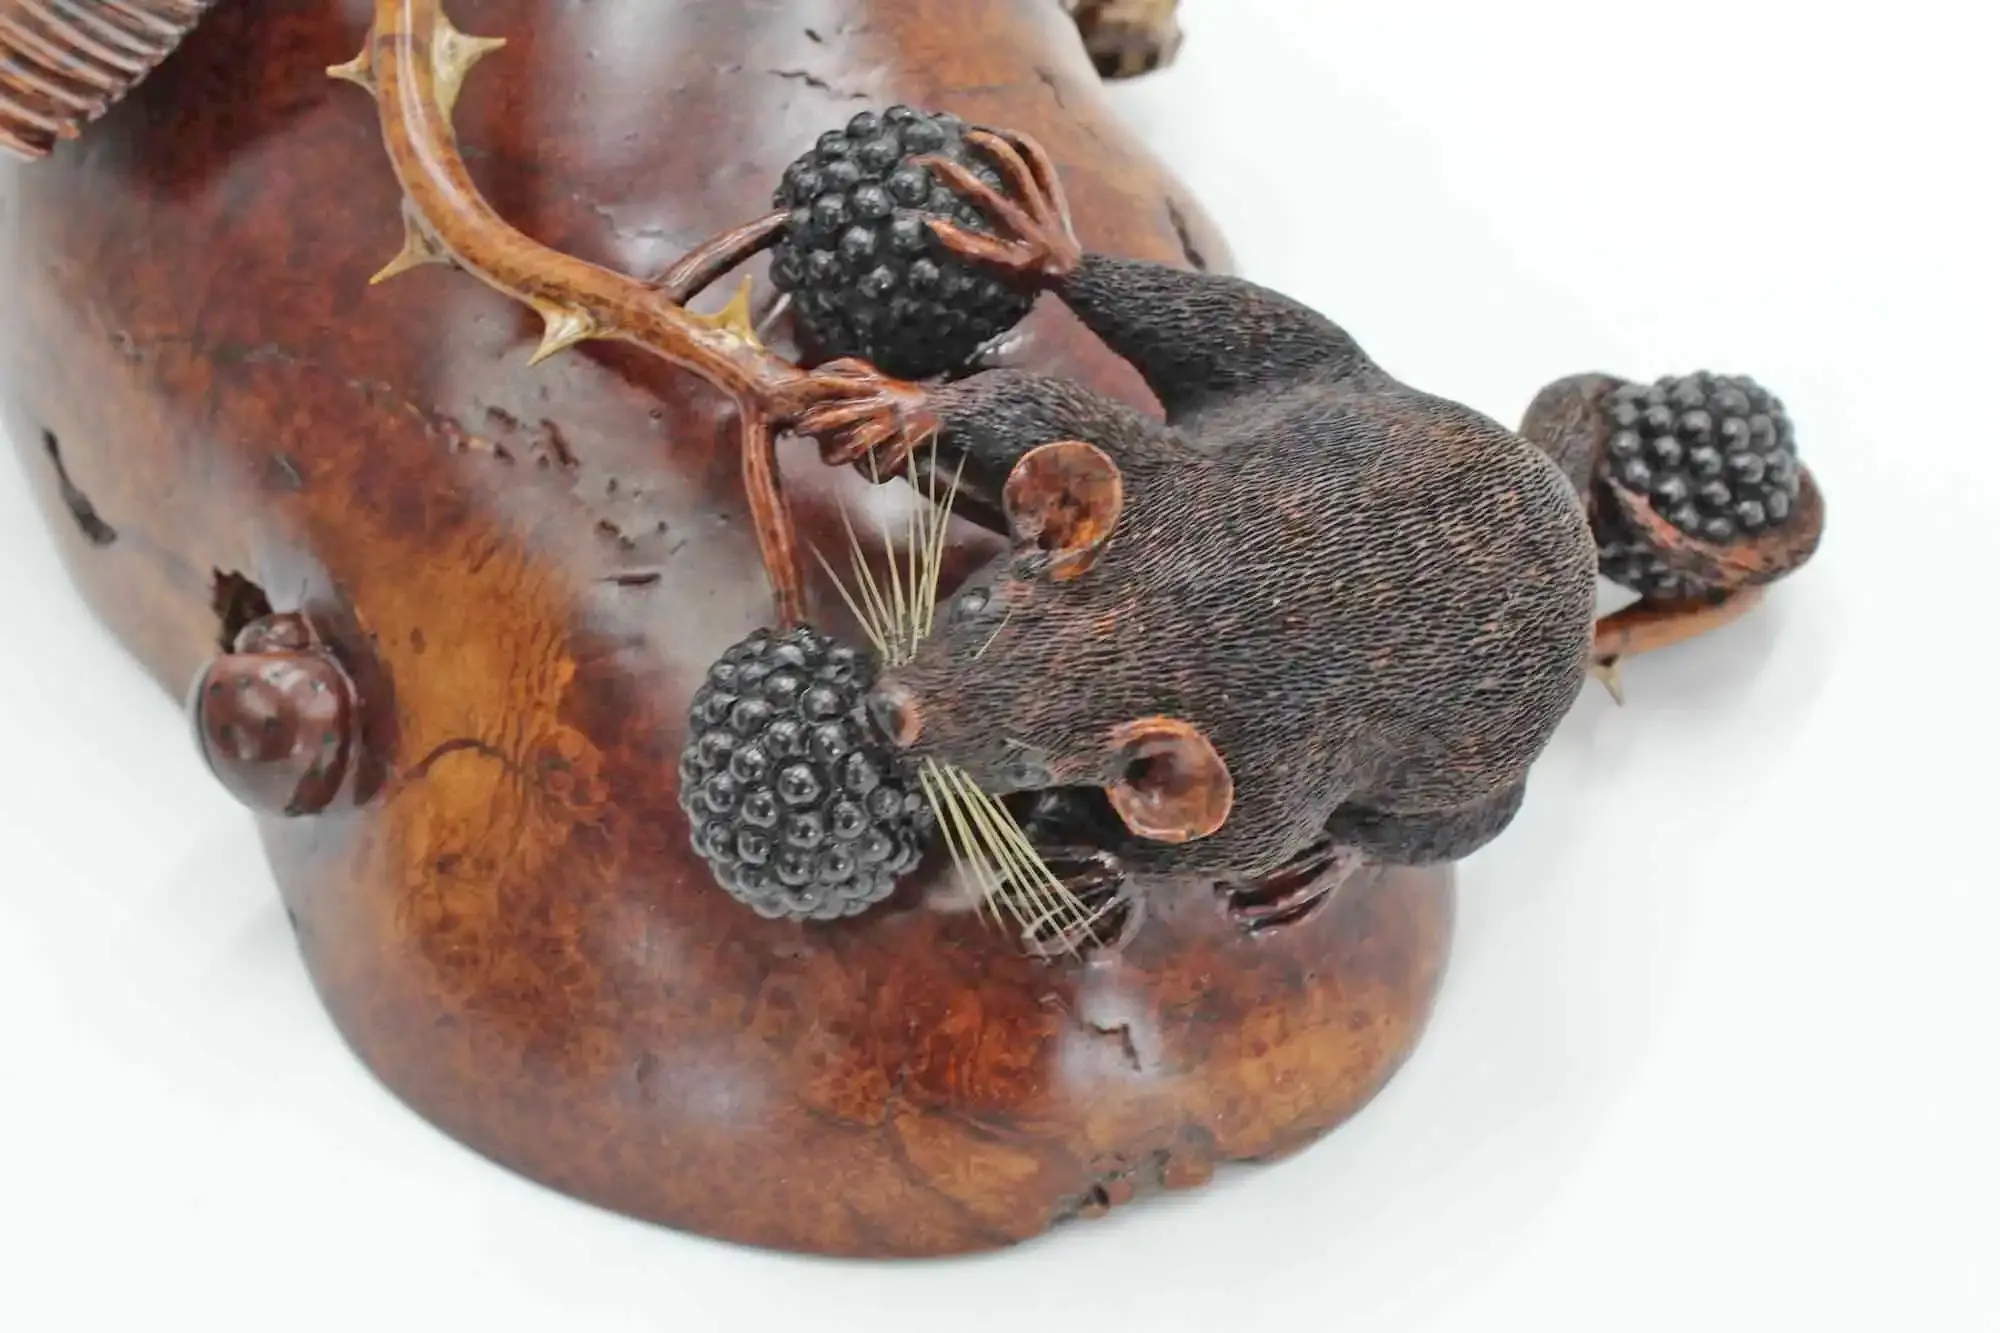 Mouse Blackberries woodcarving sculpture